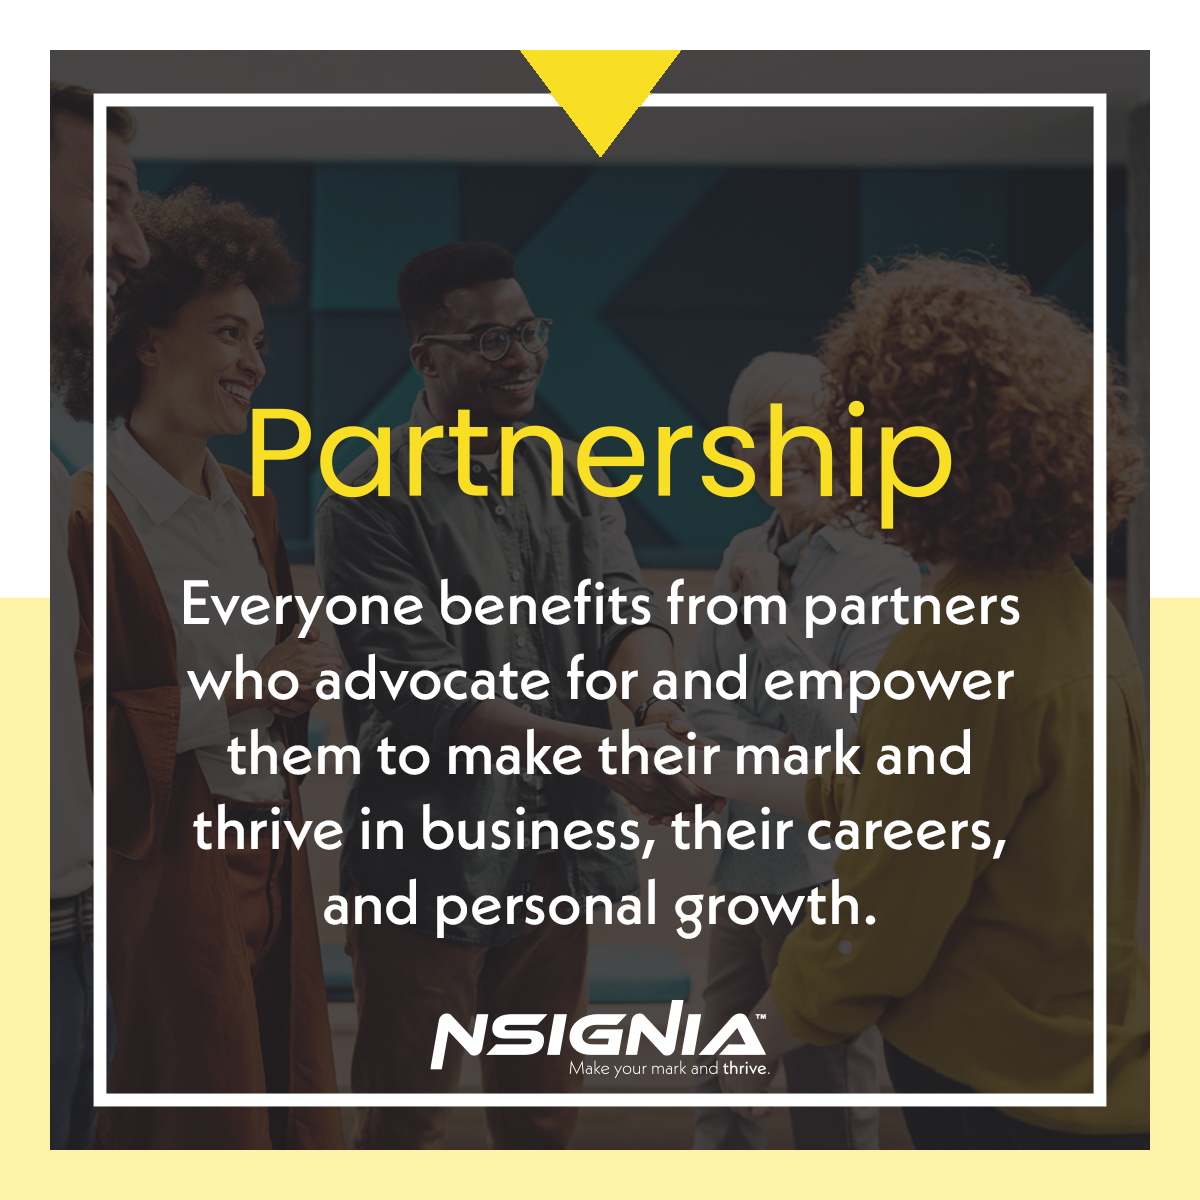 Partnership - Everyone benefits from partners who advocate for and empower them to make their mark and thrive in business, their careers, and personal growth.